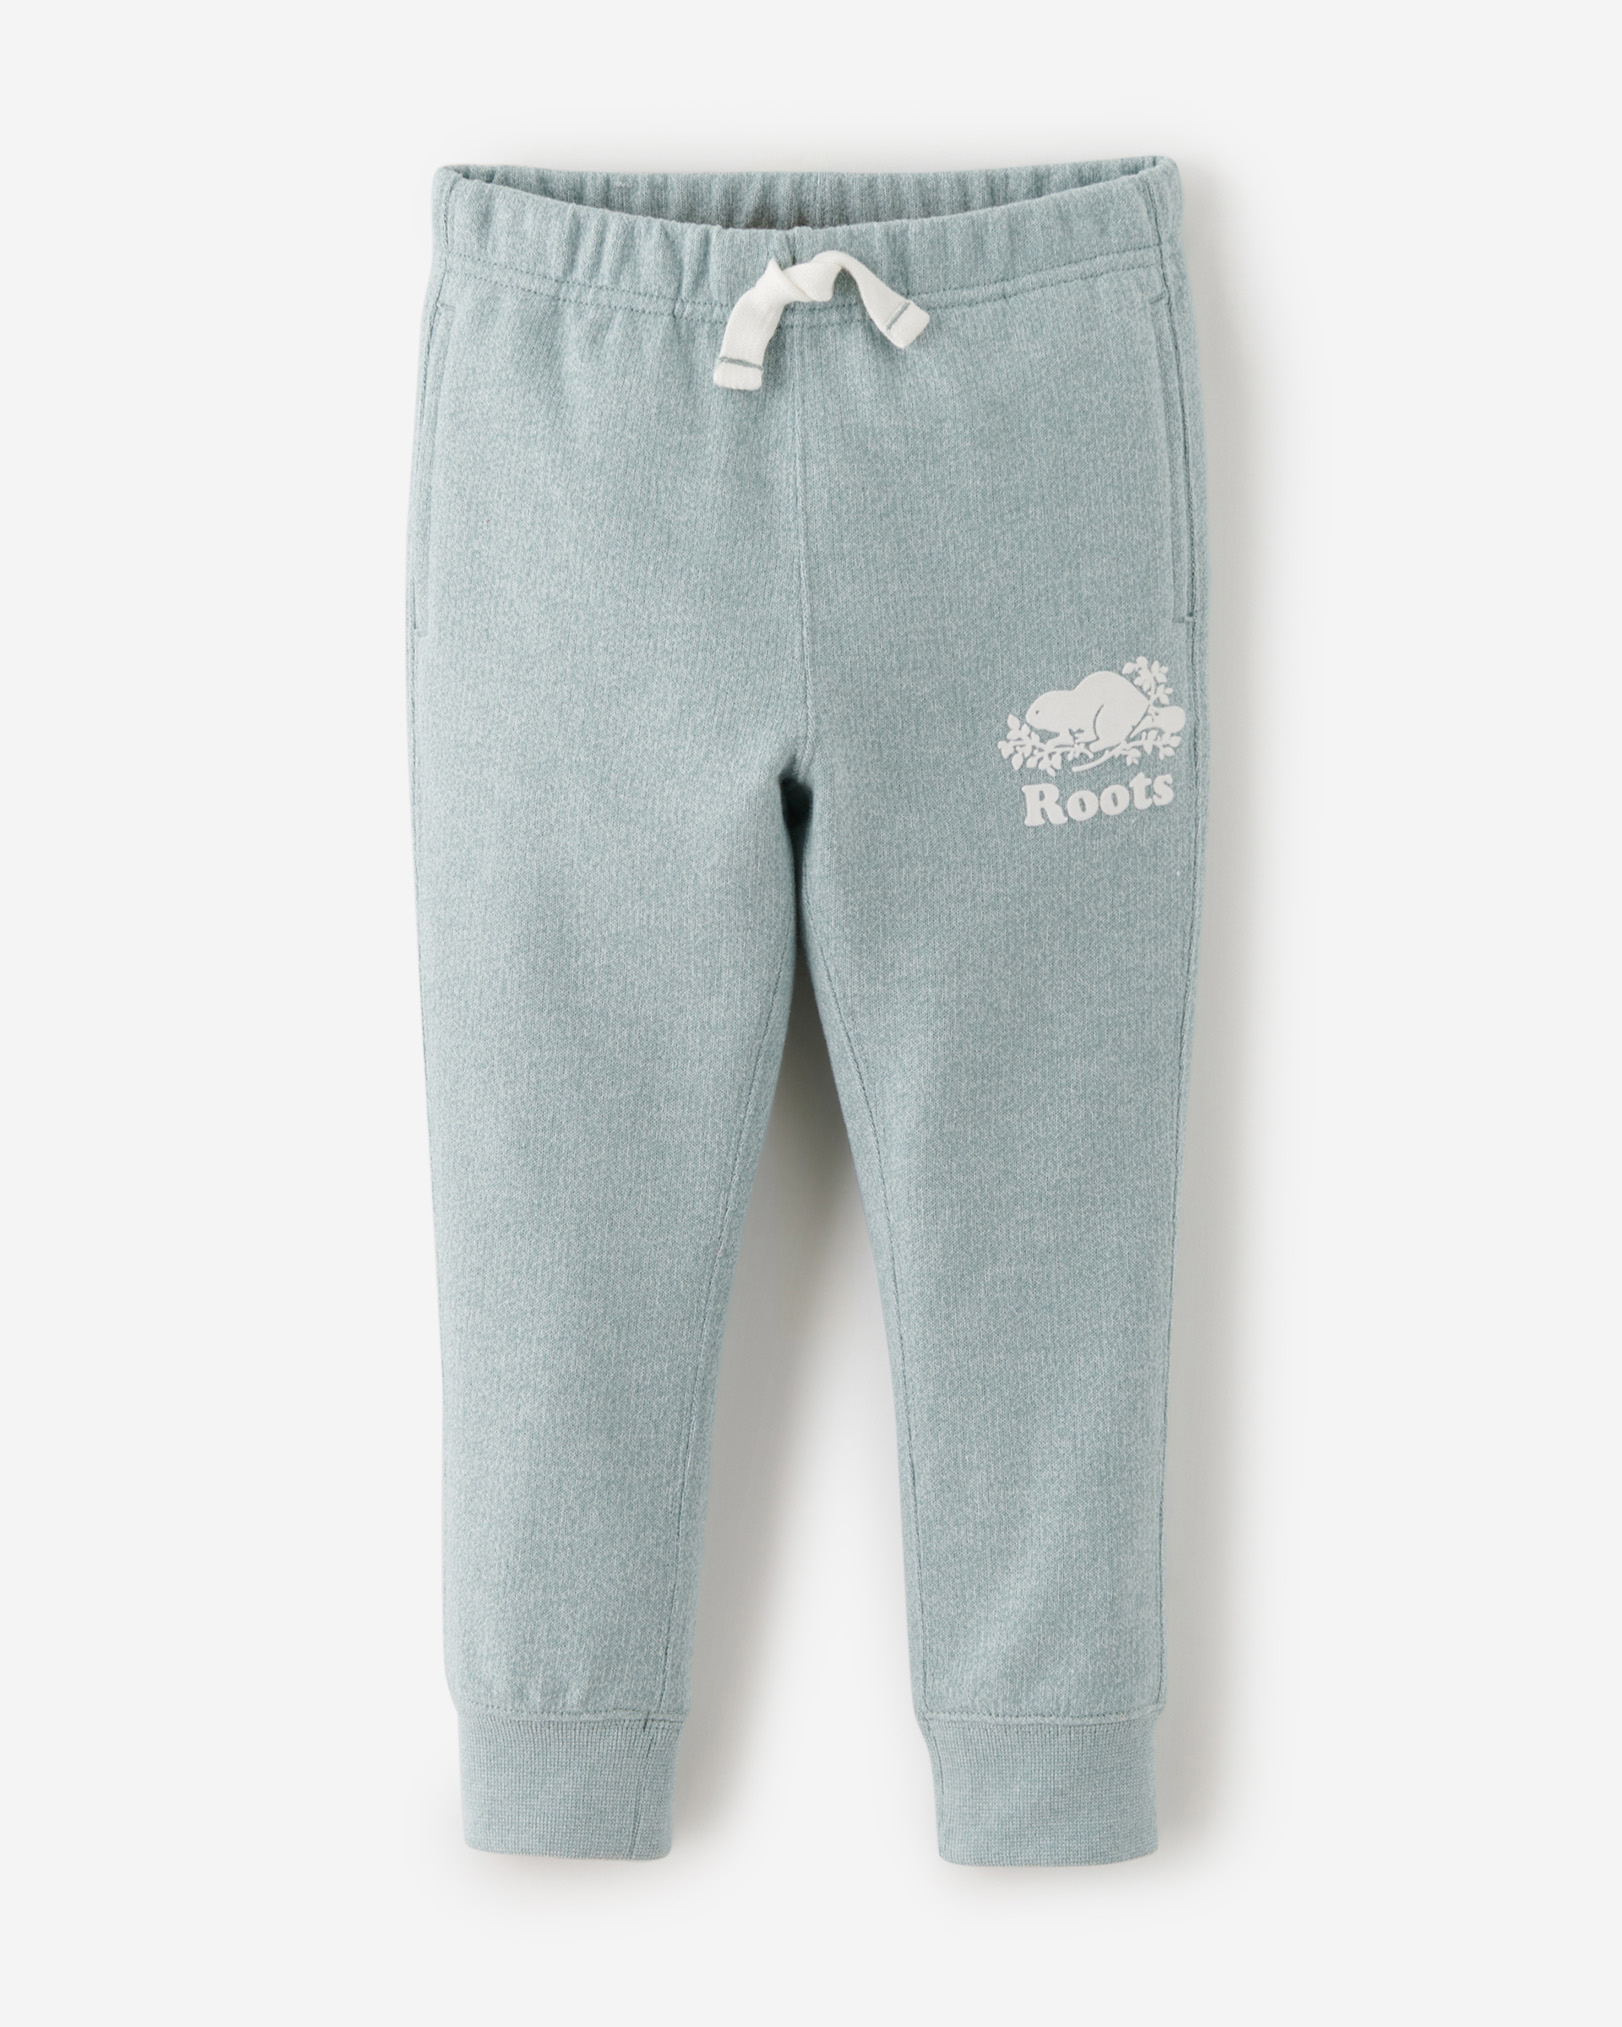 Roots Toddler Girl's Slim Cuff Sweatpant in Silver Blue Pepper